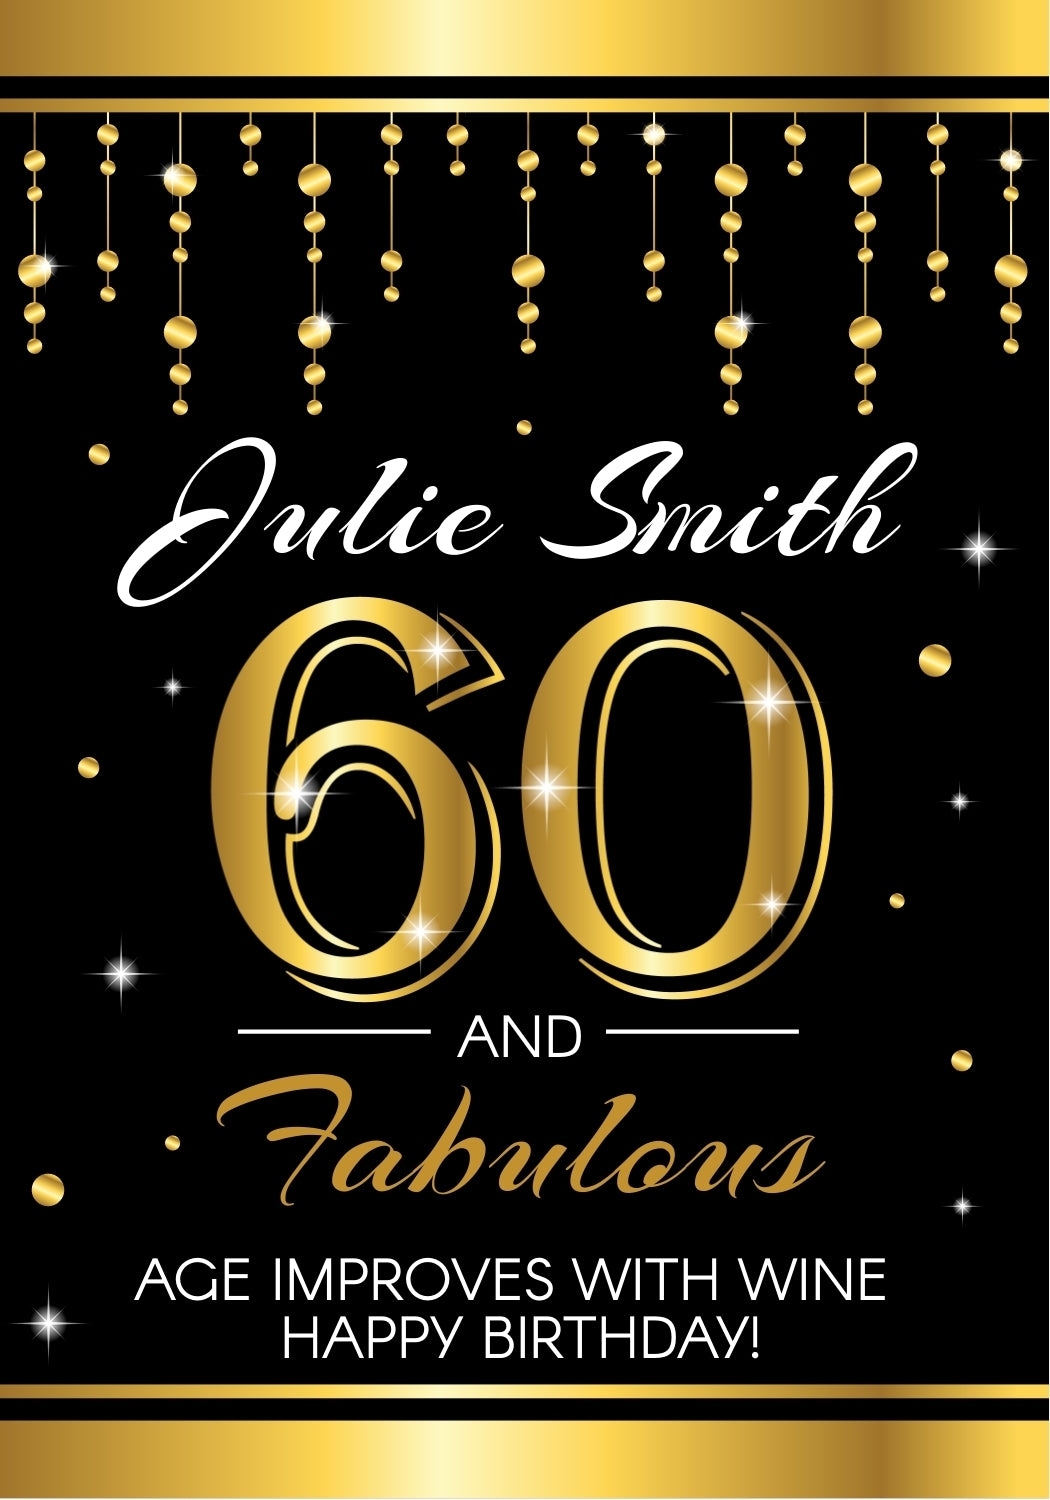 60th birthday wine labels uniquely designed easily